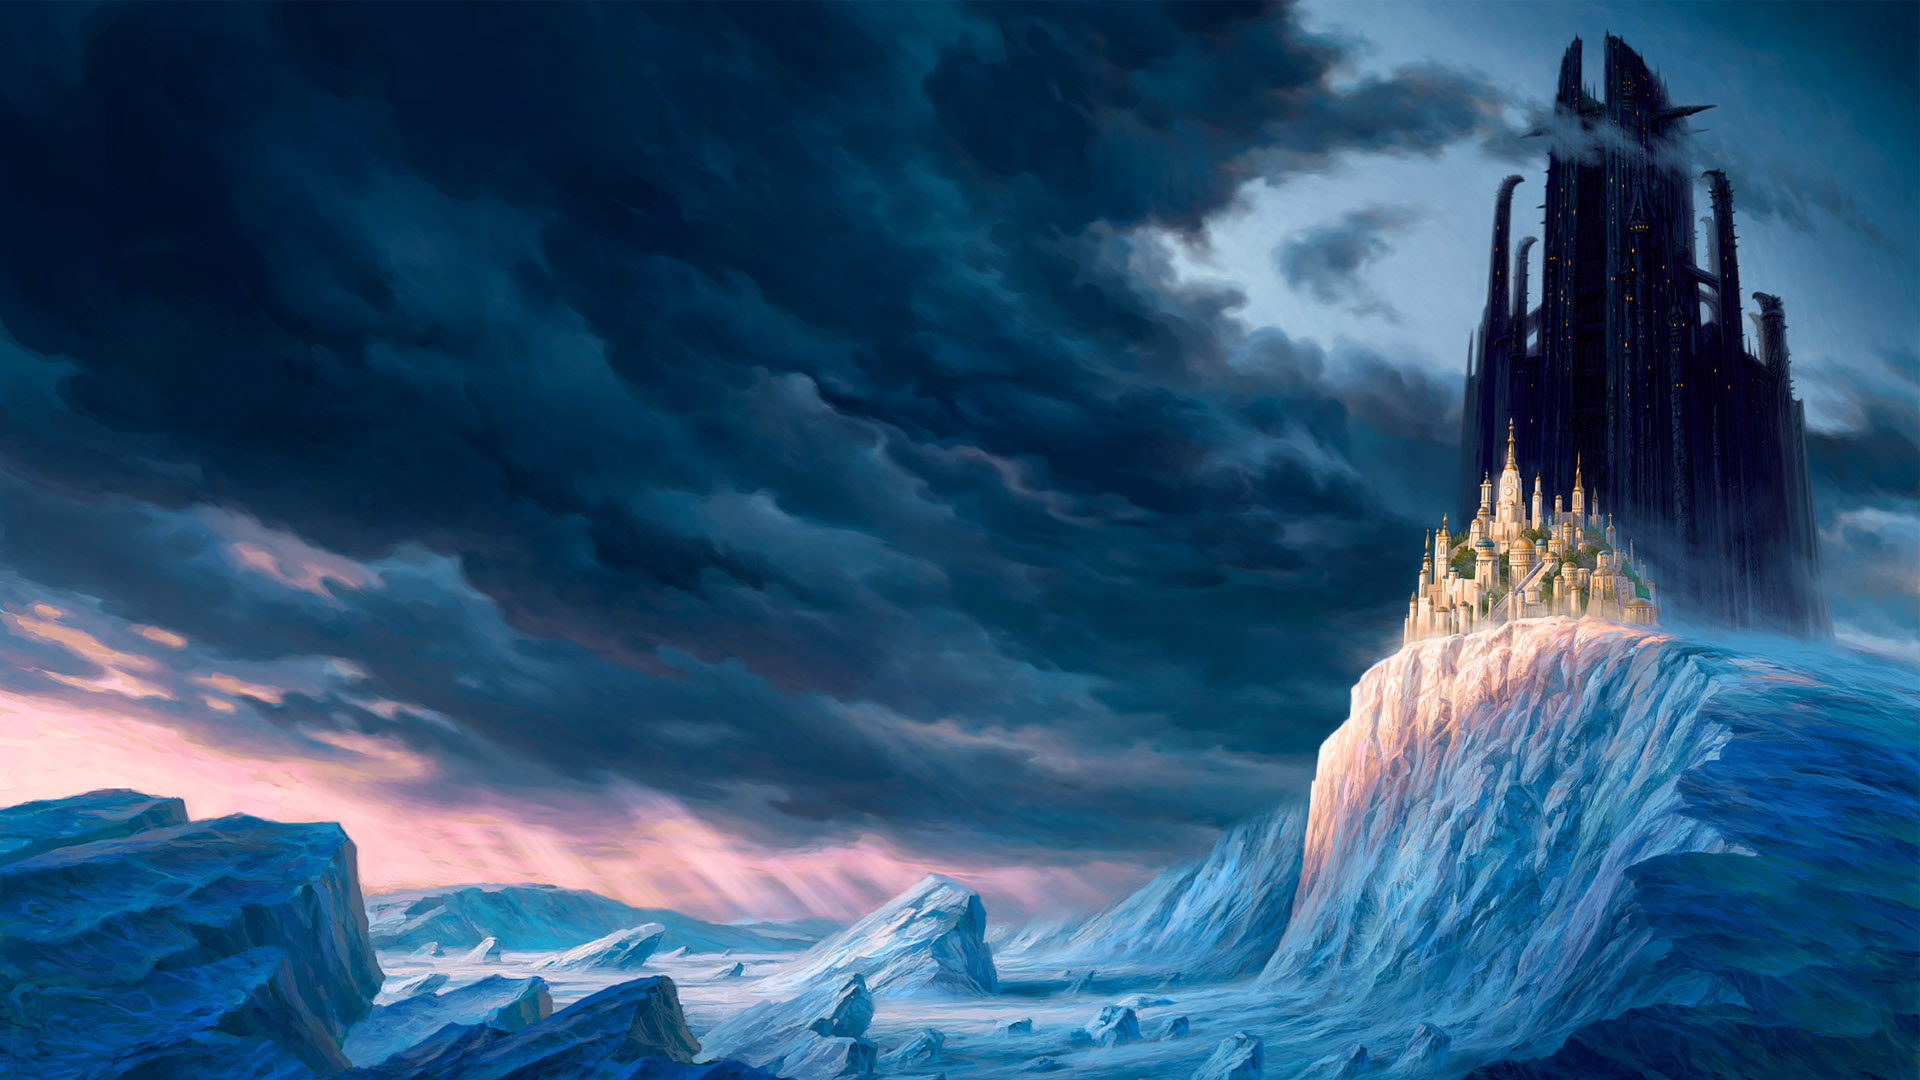 Of Ice Castle Google Themes Mountain Wallpaper